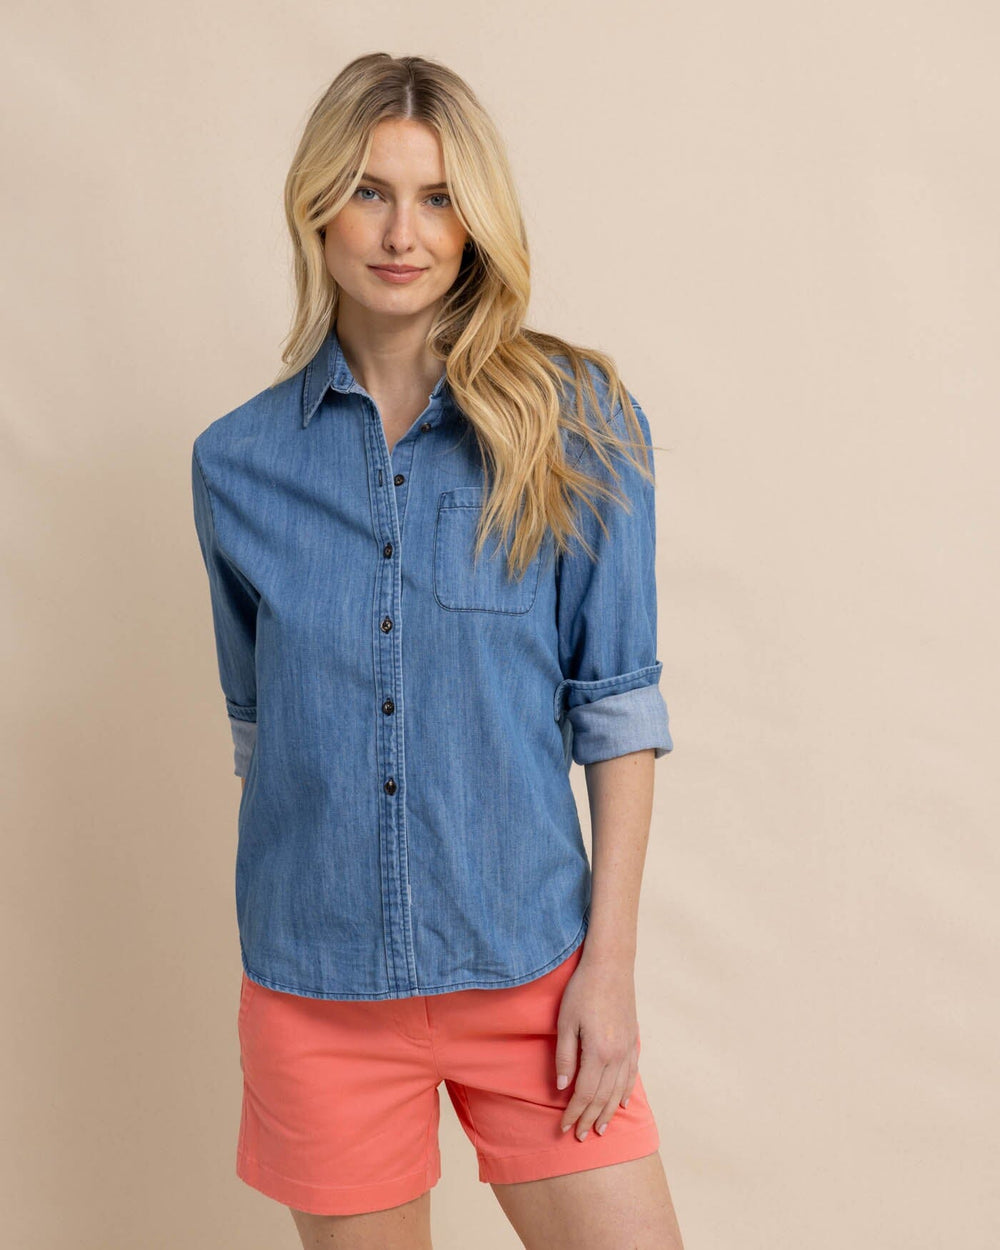 The front view of the Southern Tide Katherine Denim Shirt by Southern Tide - Medium Wash Indigo